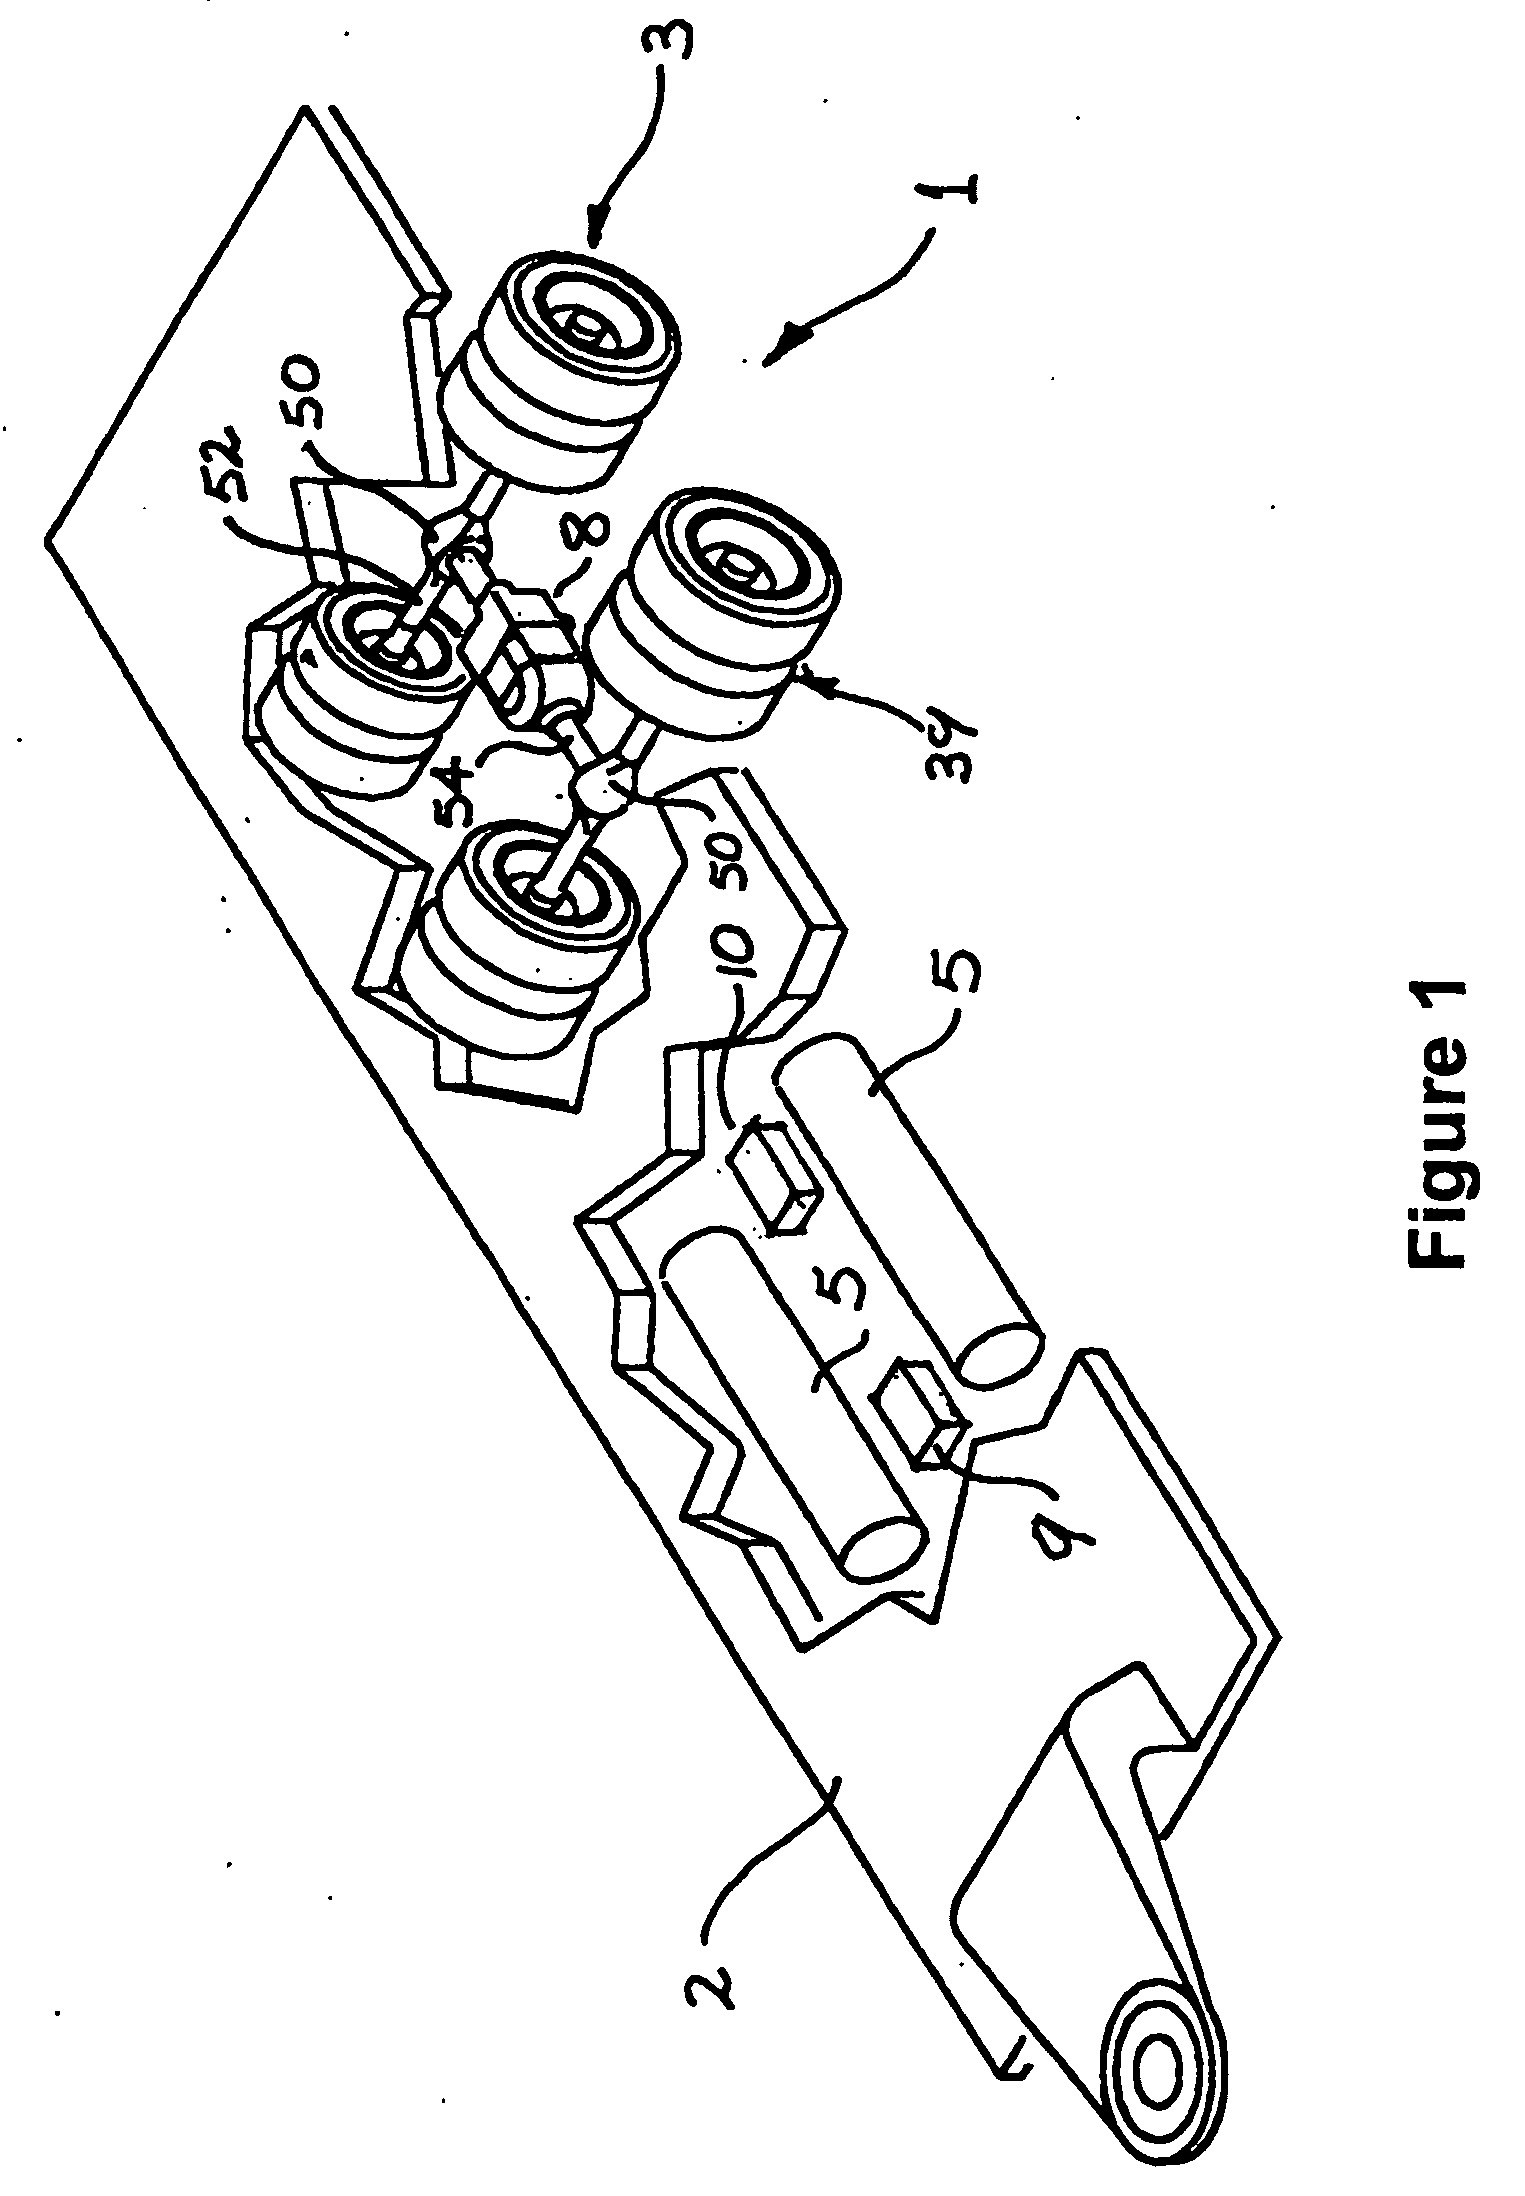 Regenerative drive system for trailers